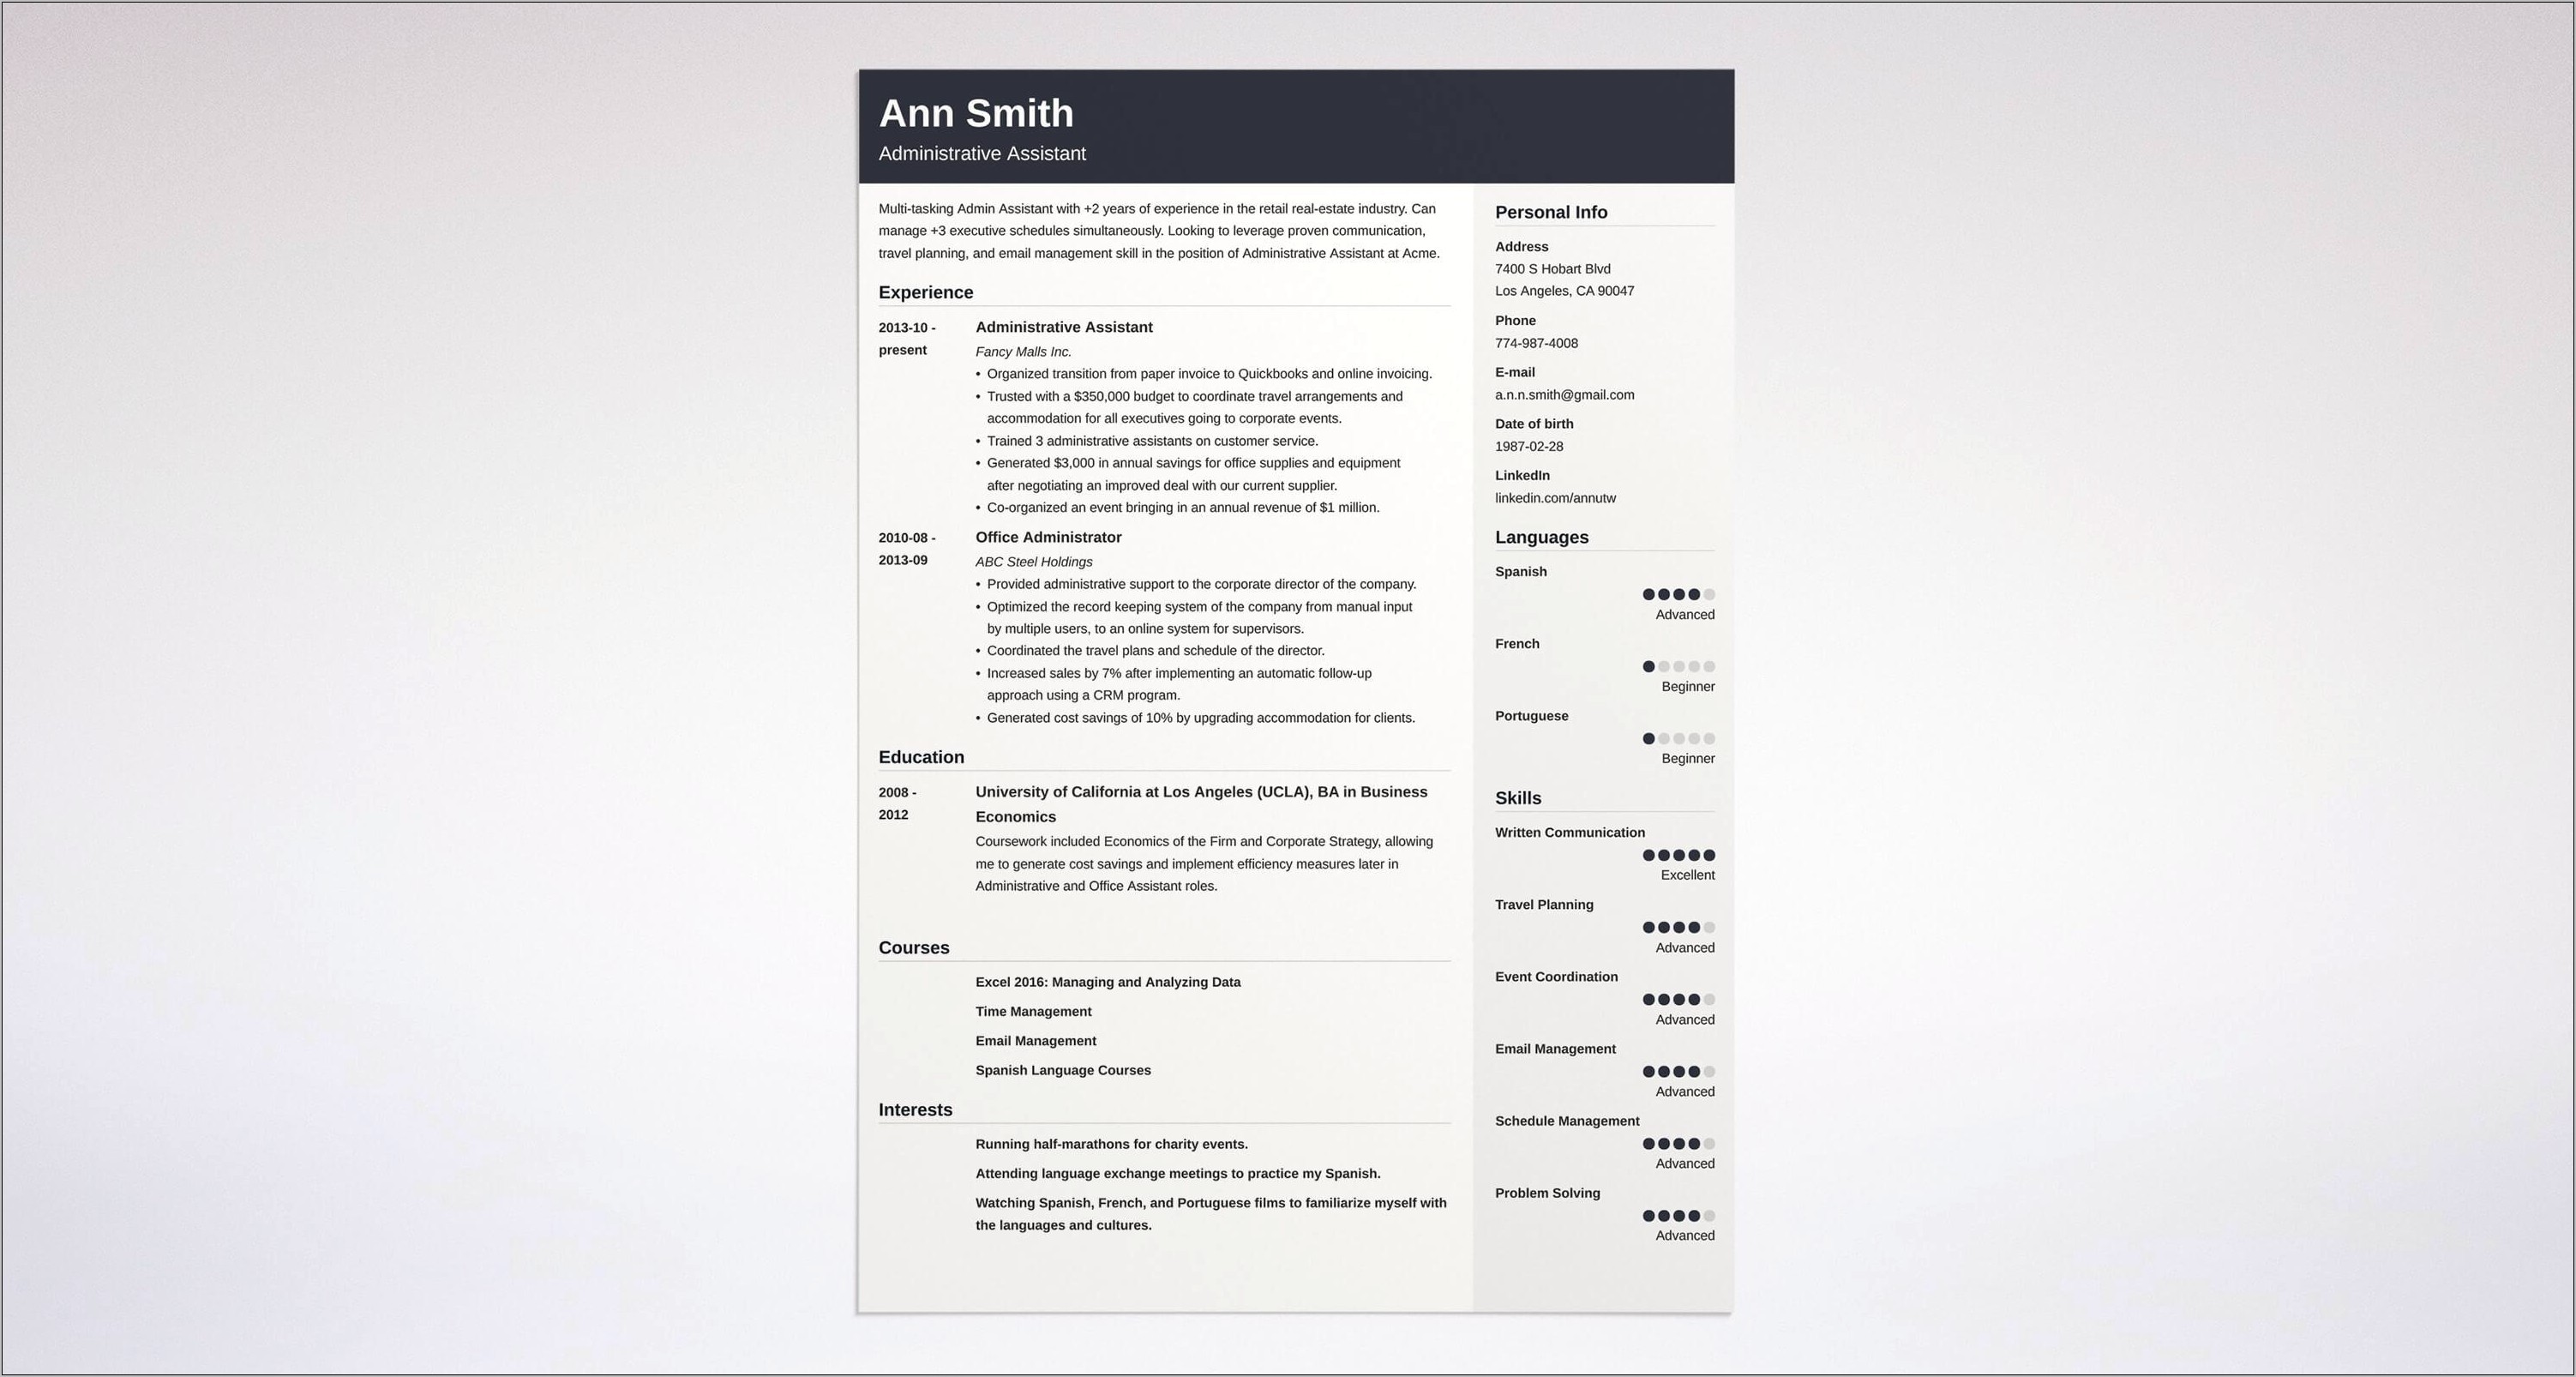 Free Online Resume For Administrative Assistant